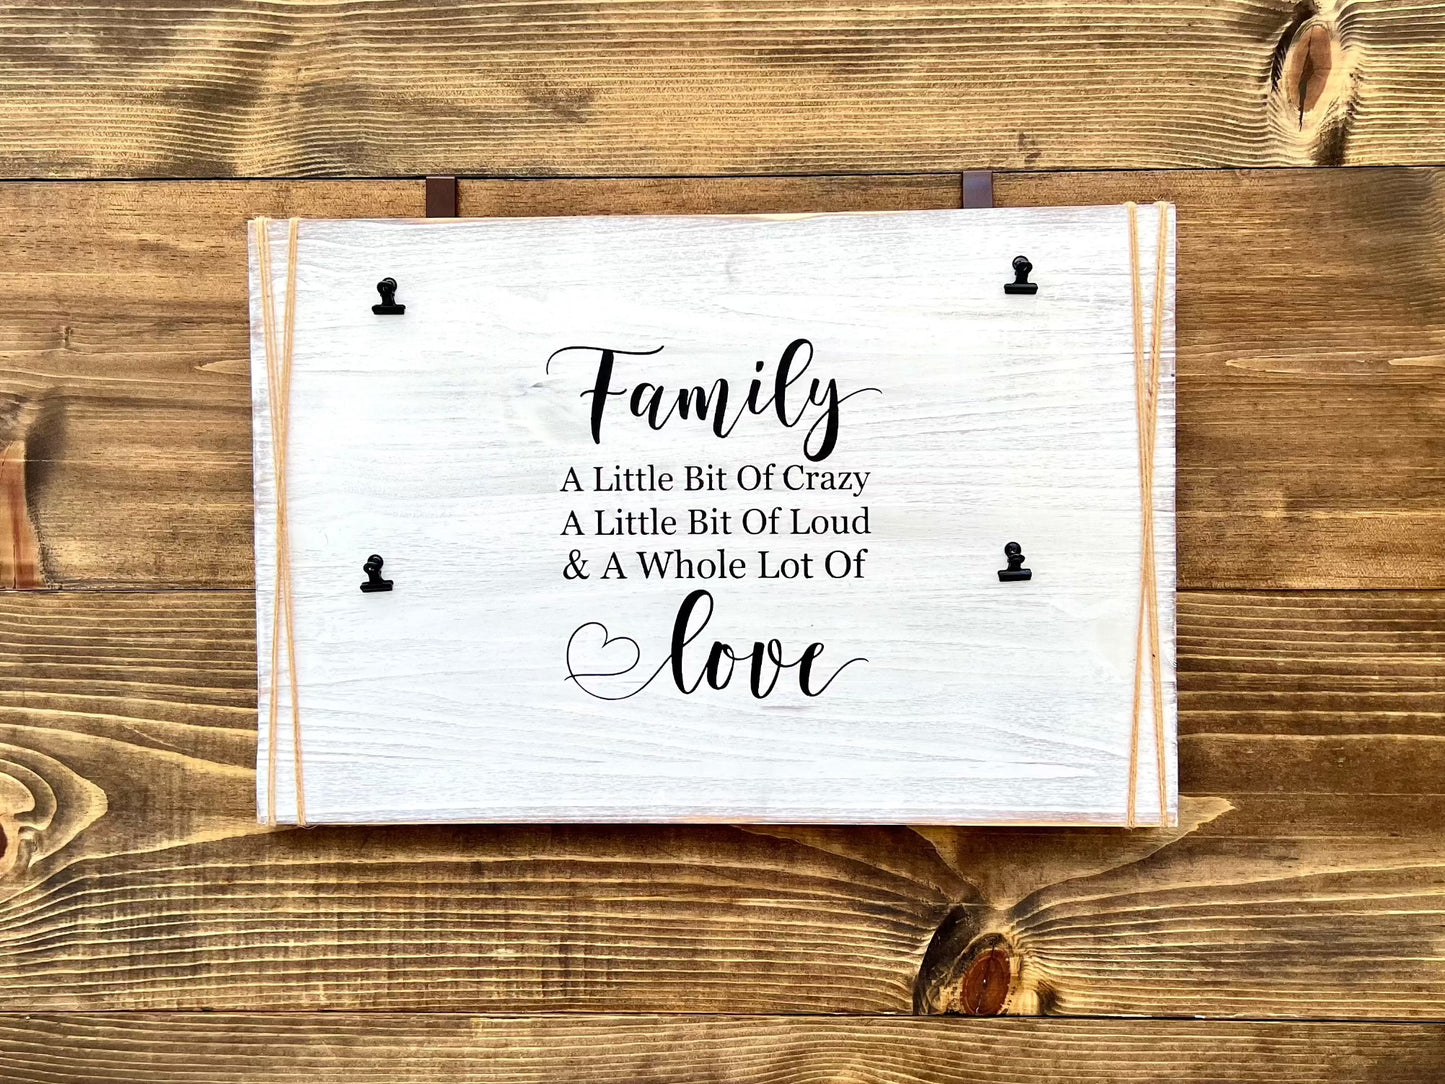 family wood sign, display photo wood sign